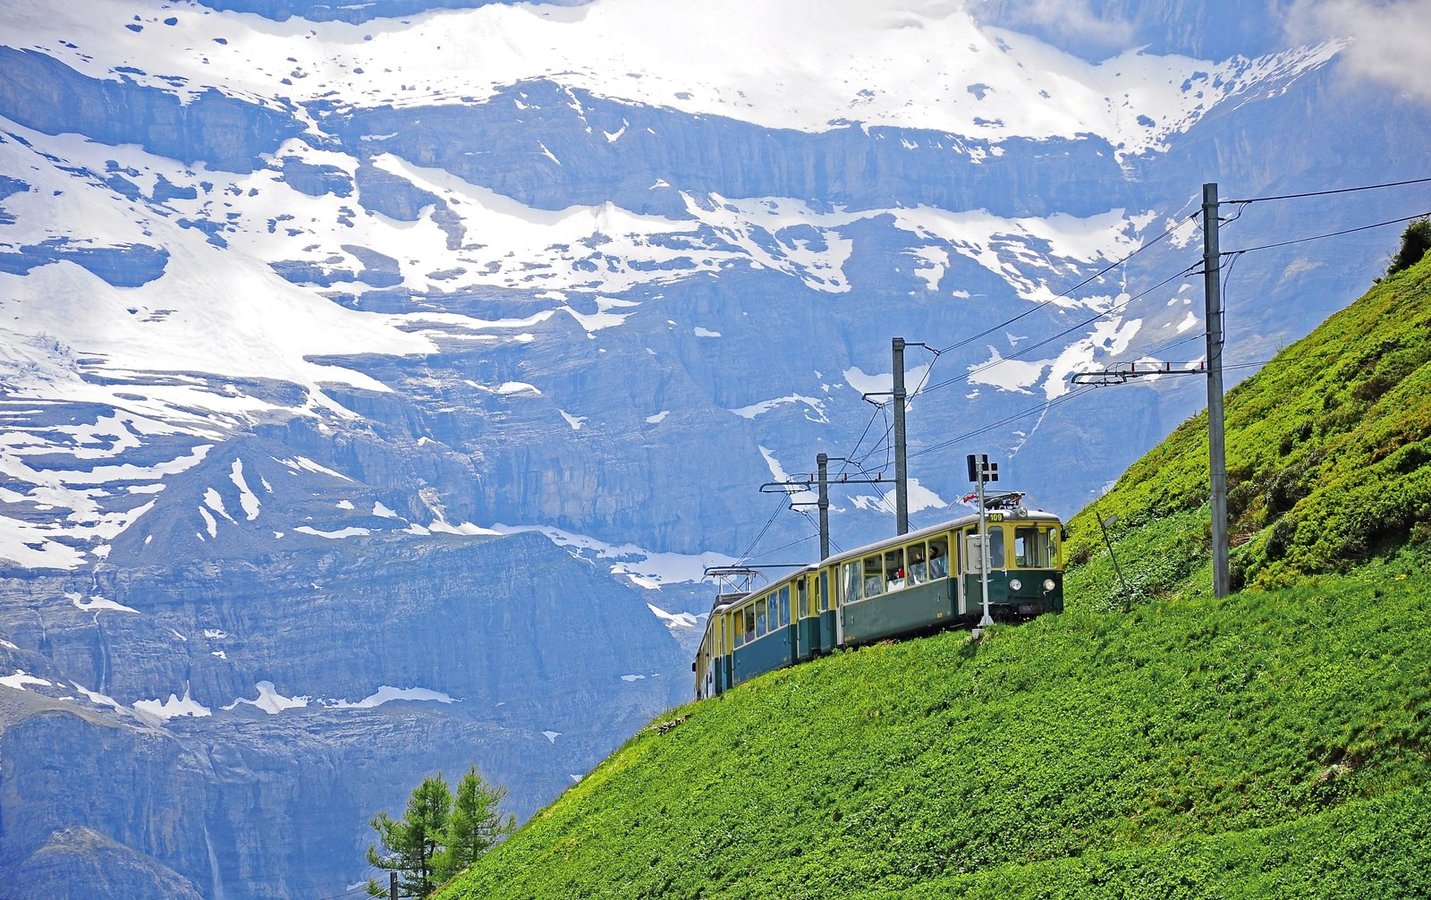 switzerland travel package from india